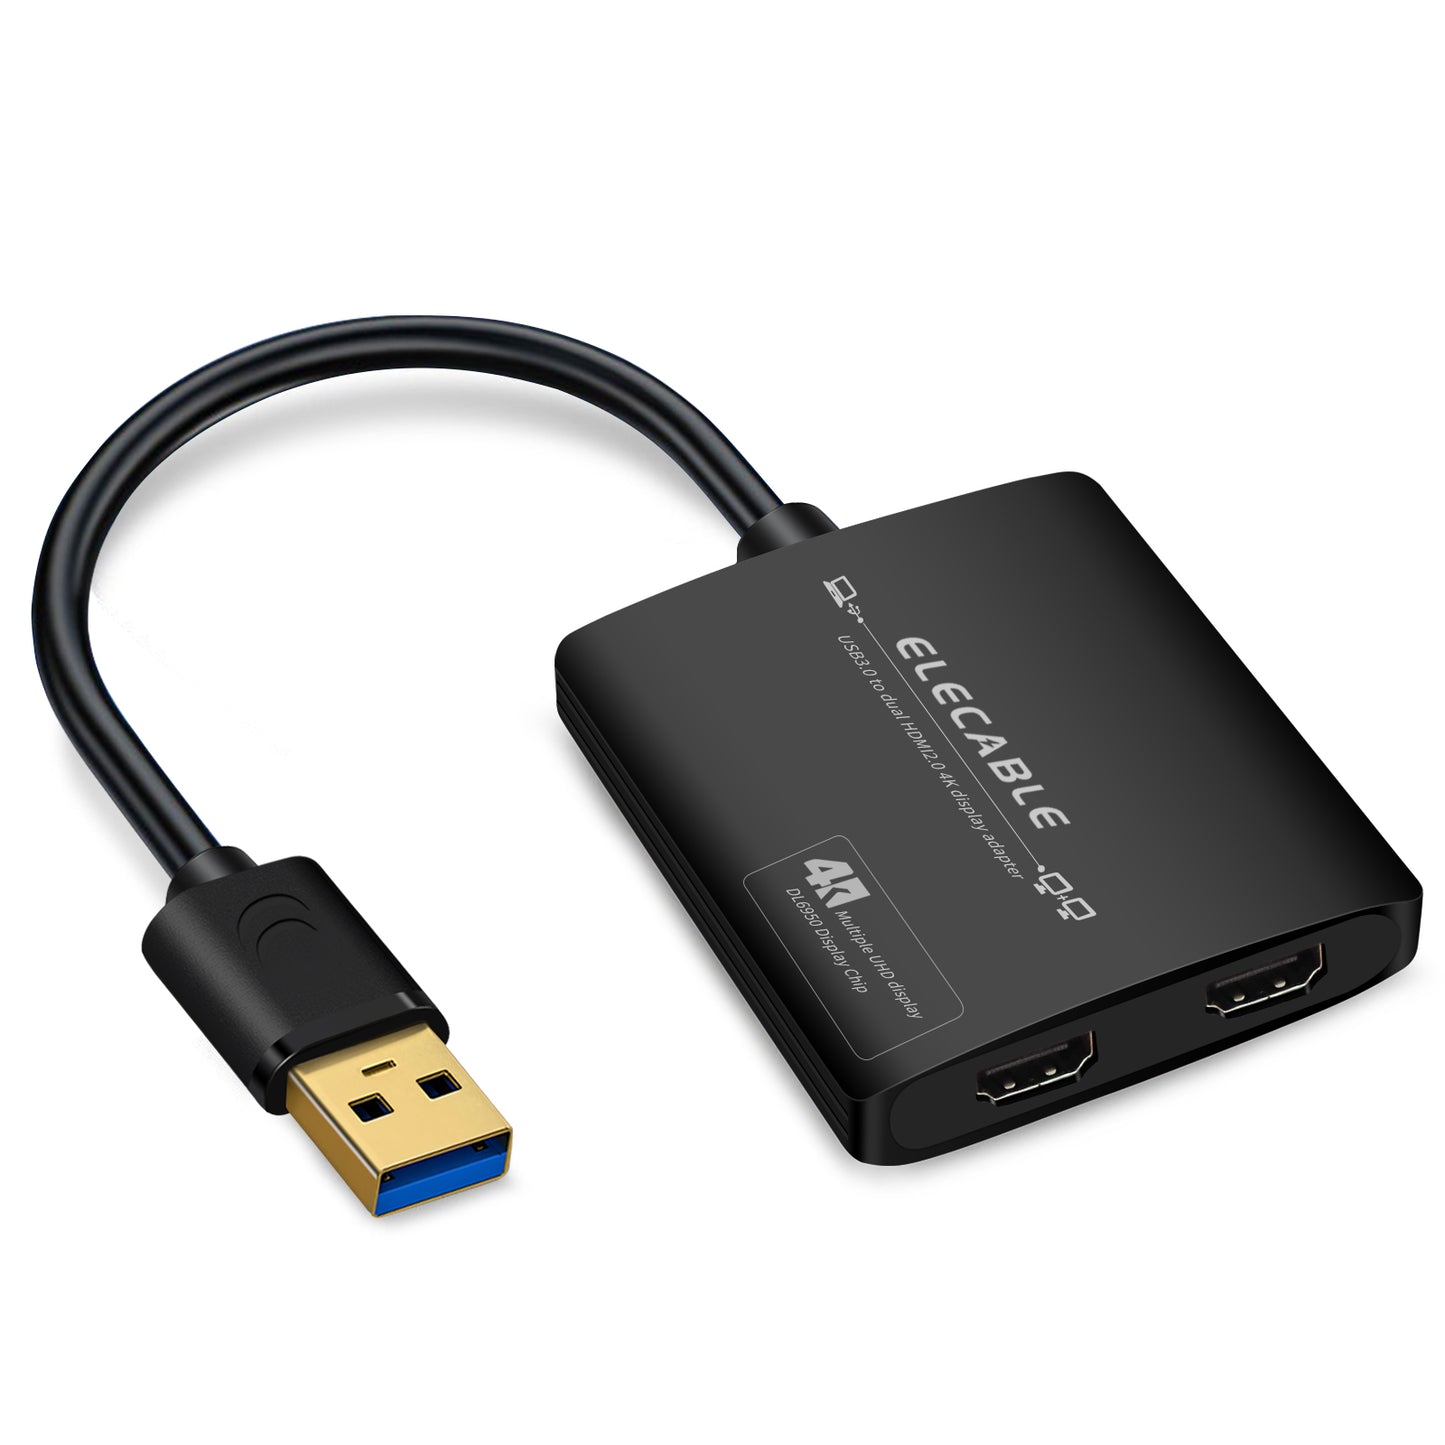 USB 3.0 to Dual HDMI Adapter - 4K+4K 60Hz Ultra HD - Built-in DisplayLink  DL6950 Chip - Extend Screen to Multiple Monitor TV Compatible with